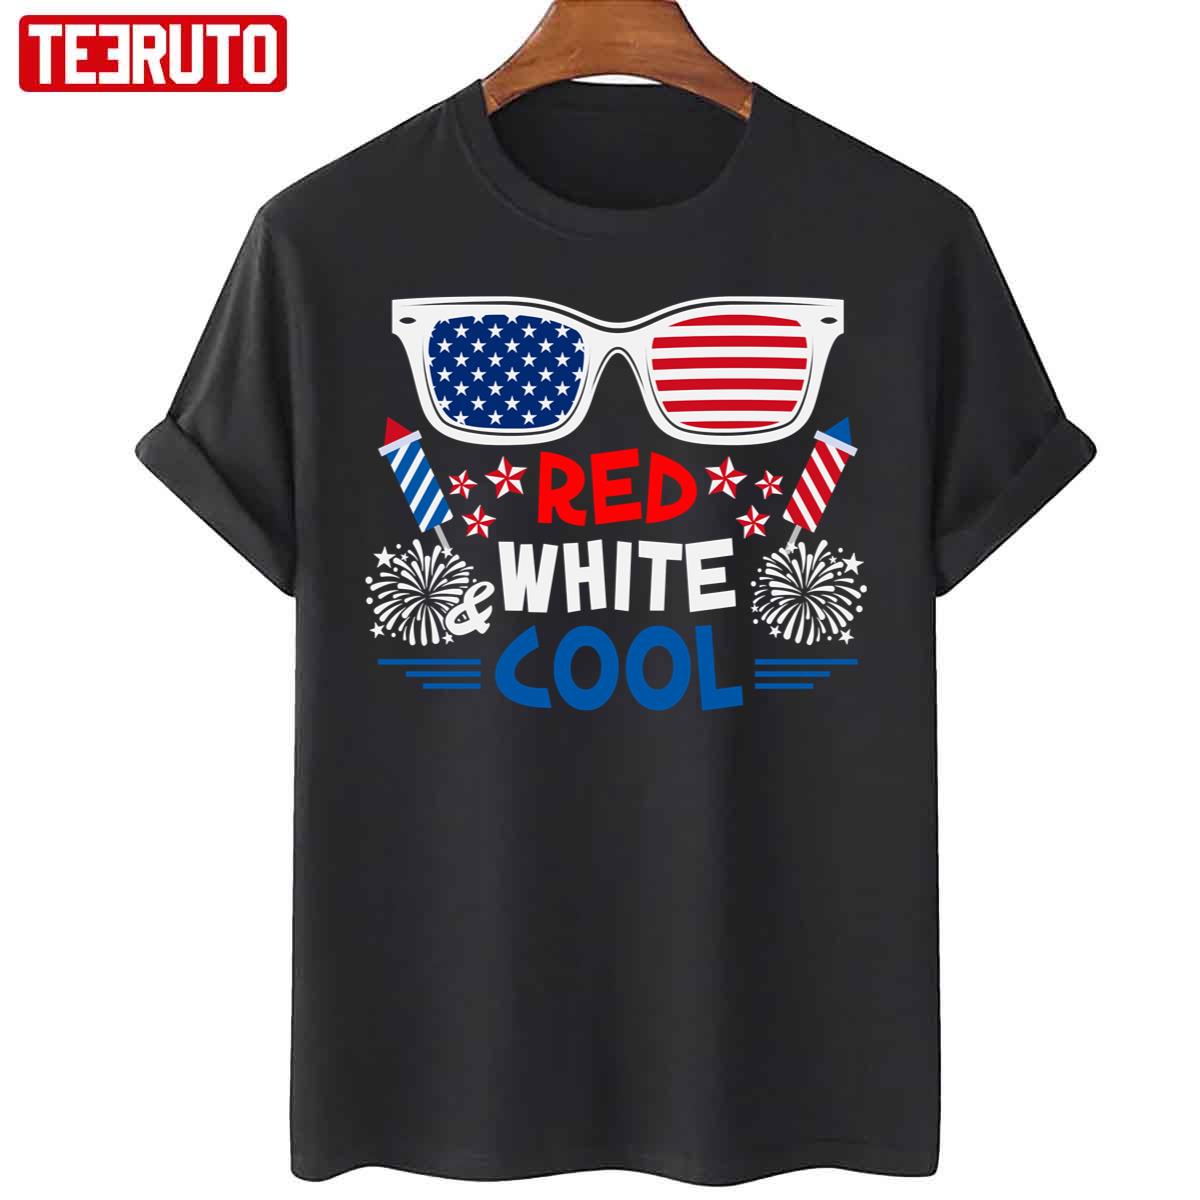 Red White Cool American Patriots Range 4th Of July Unisex T-Shirt